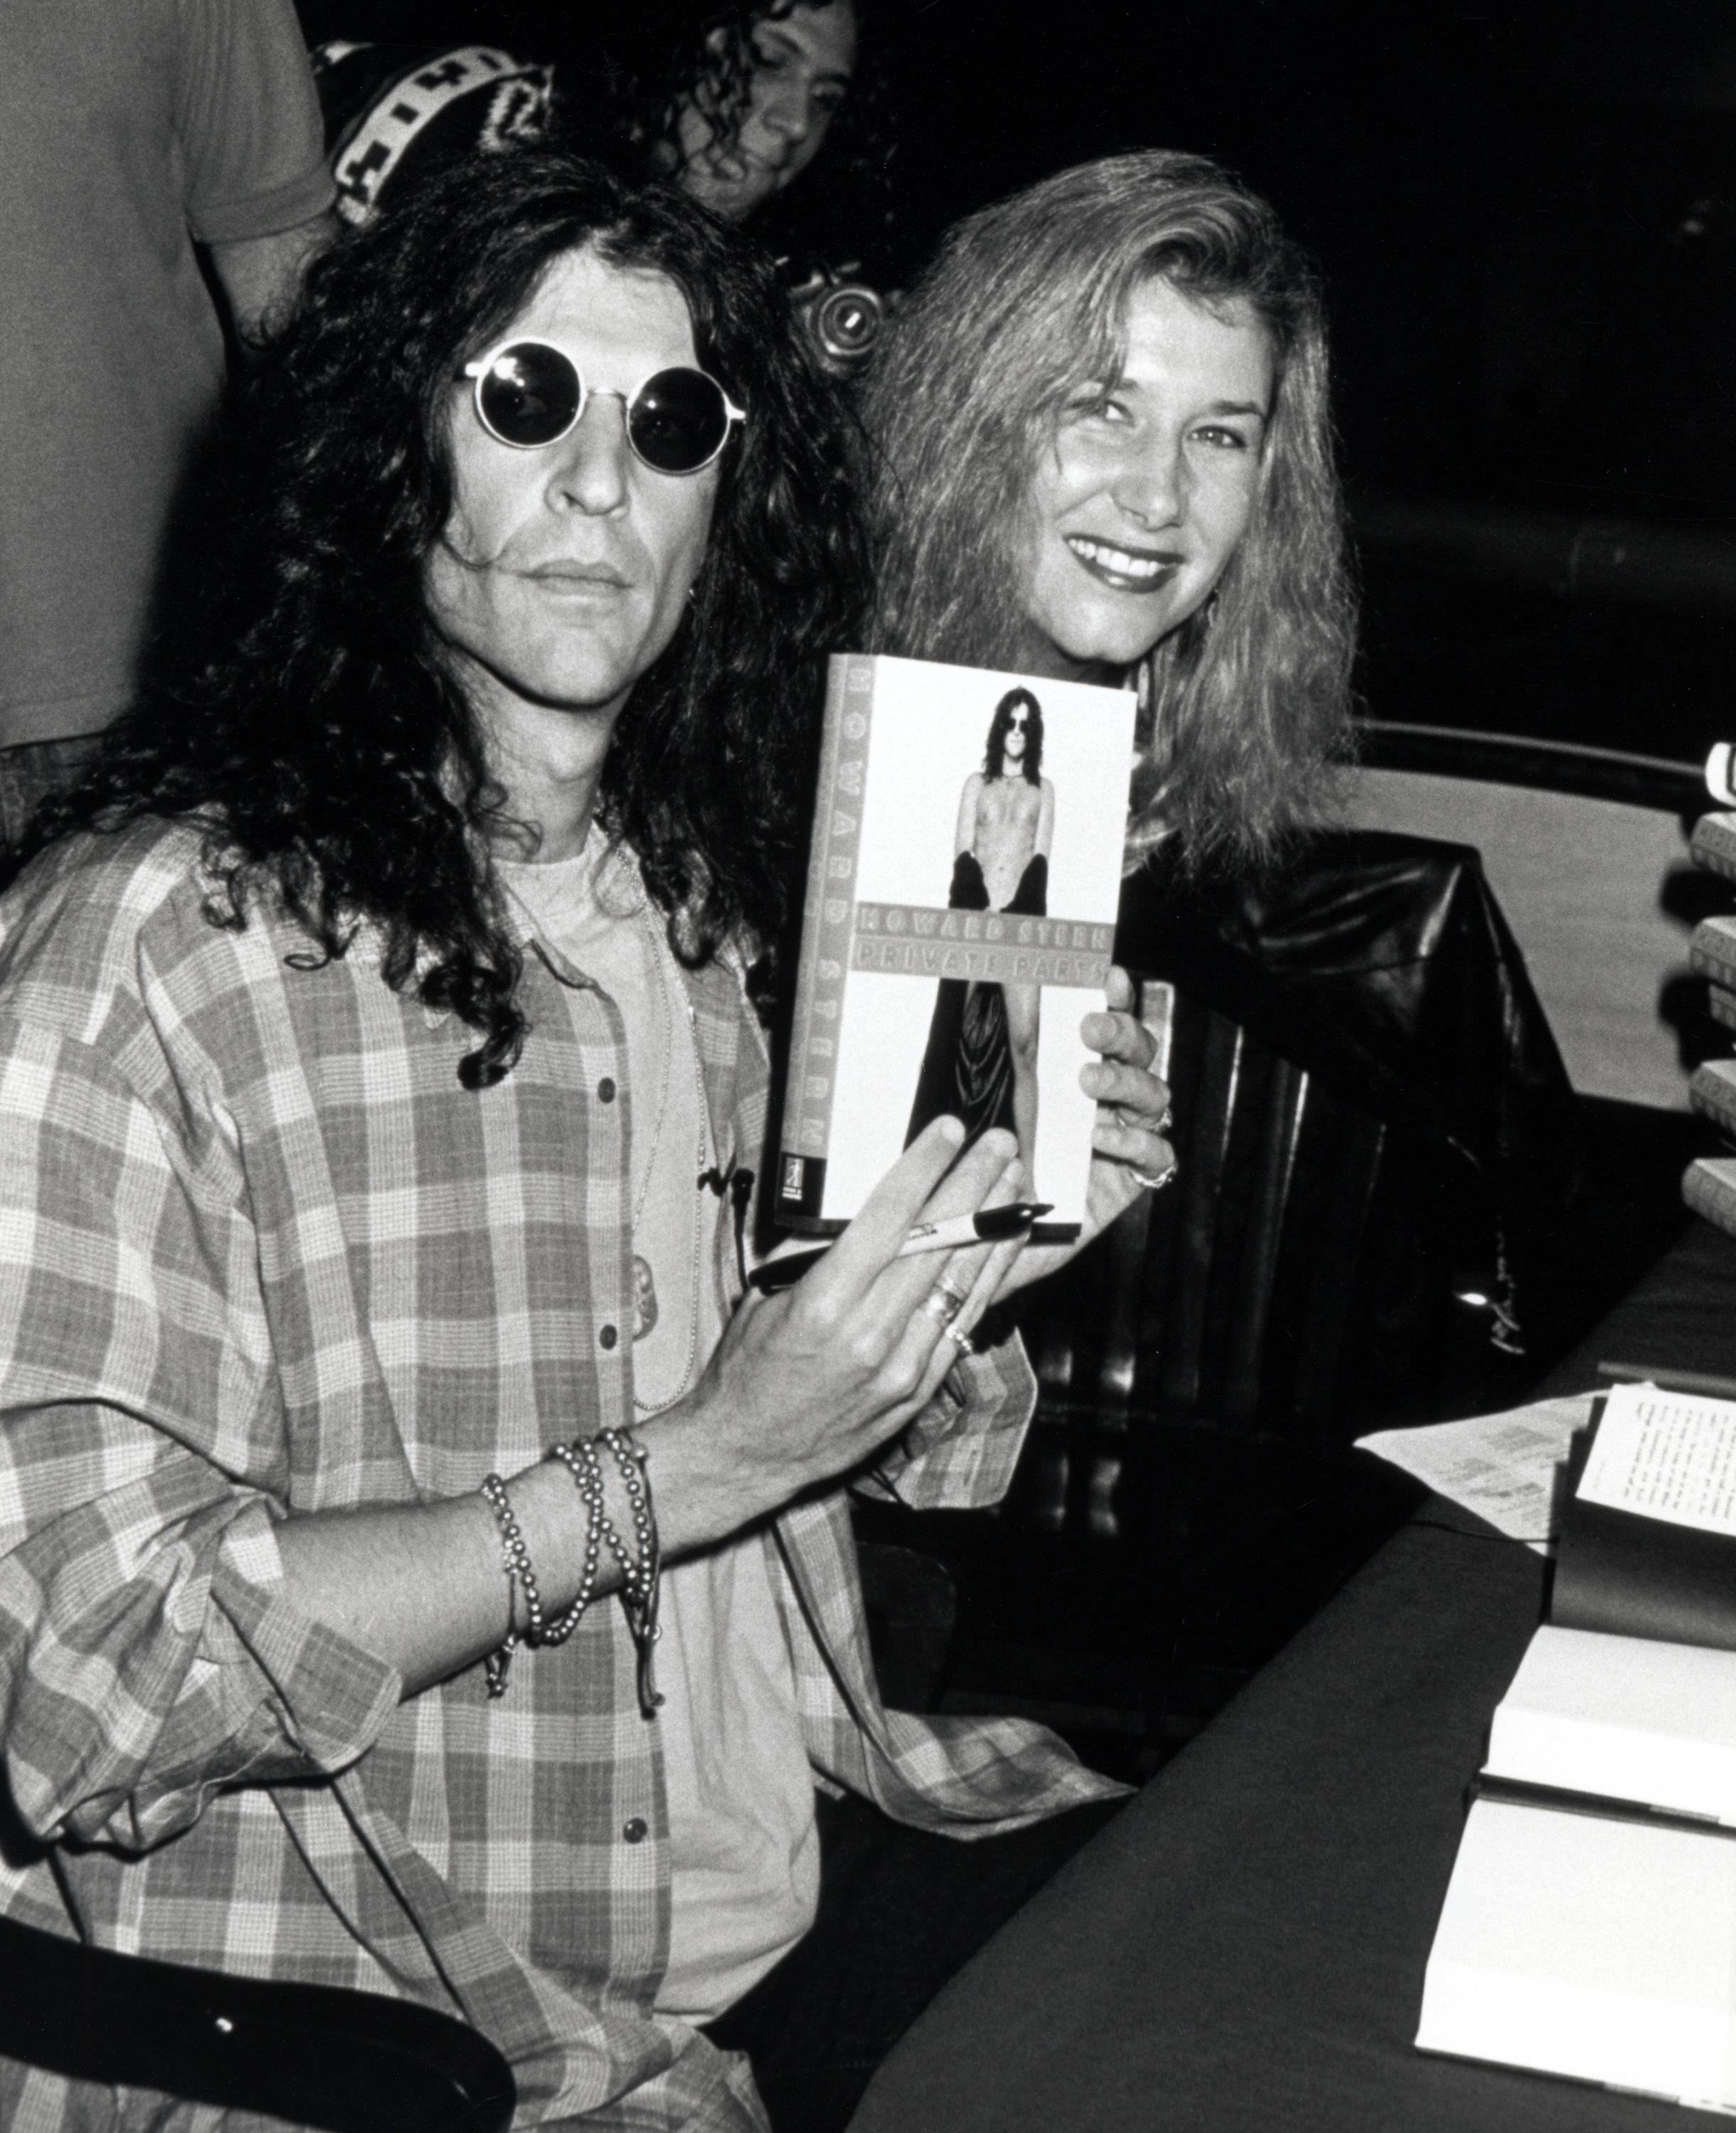 Howard and Alison Stern during his in-store book signing of "Private Parts" at Barnes and Noble in New York City on October 14, 1993 | Source: Getty Images